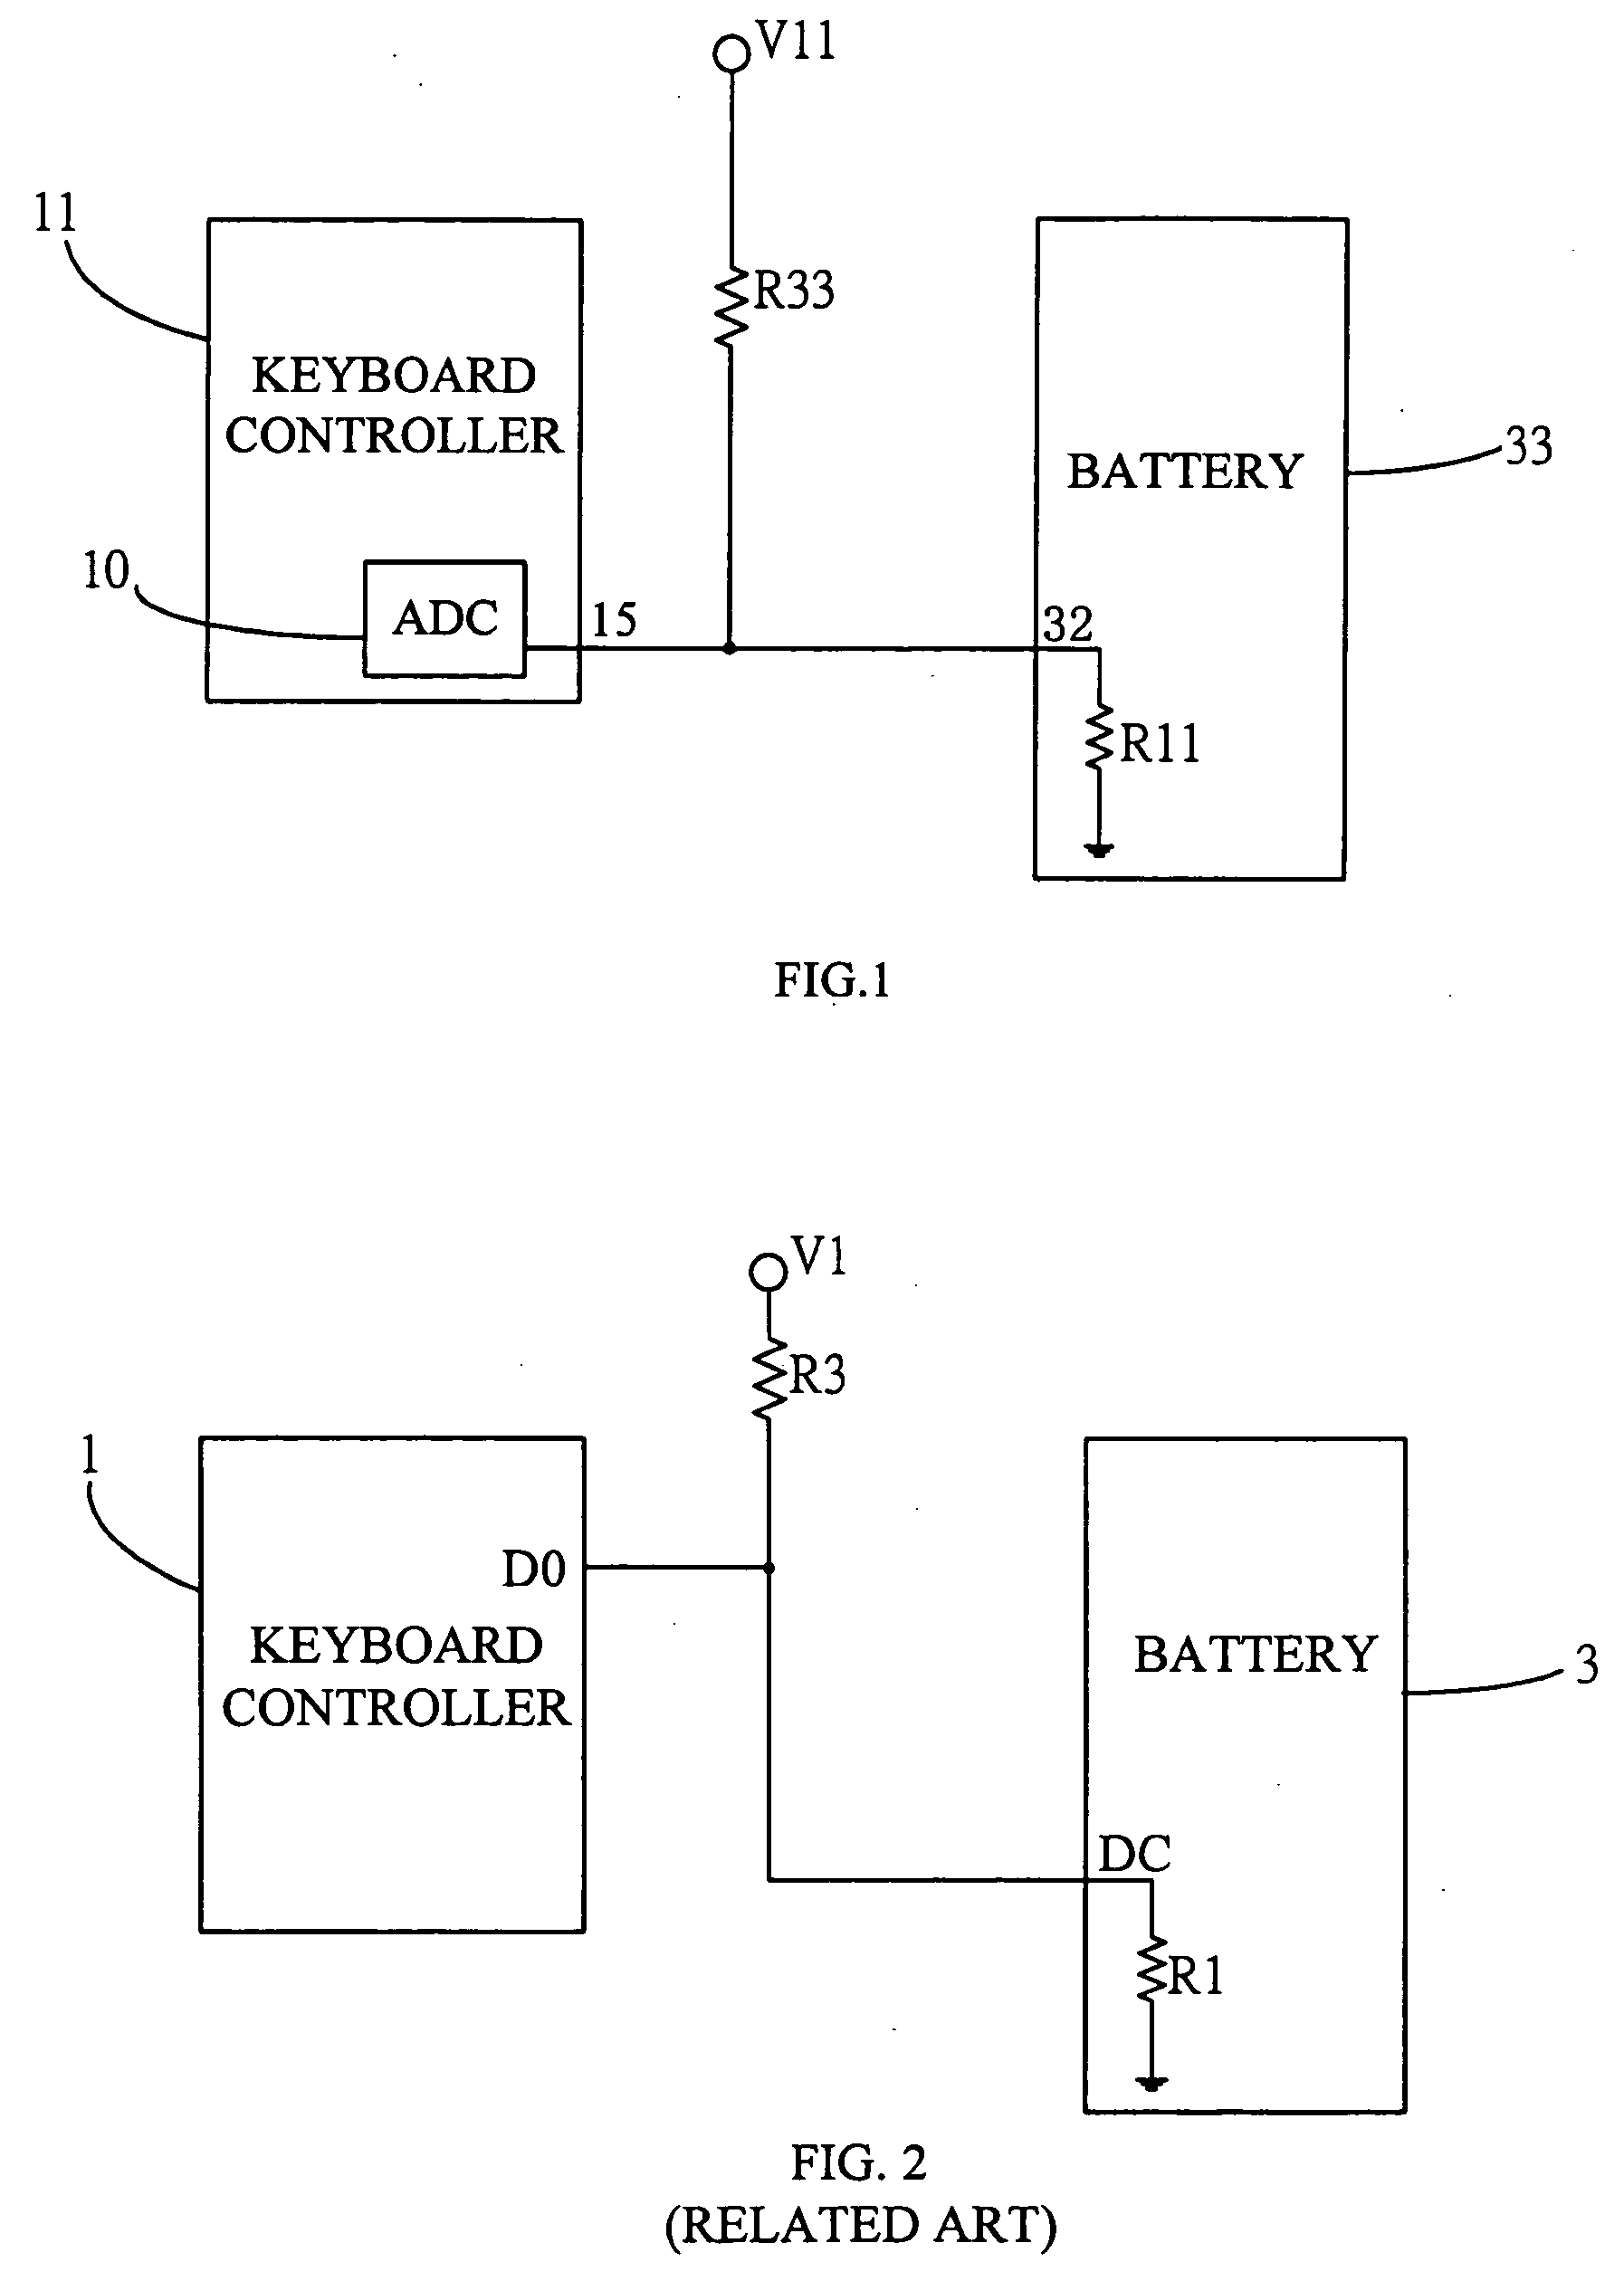 Apparatus to identify battery manufacturer